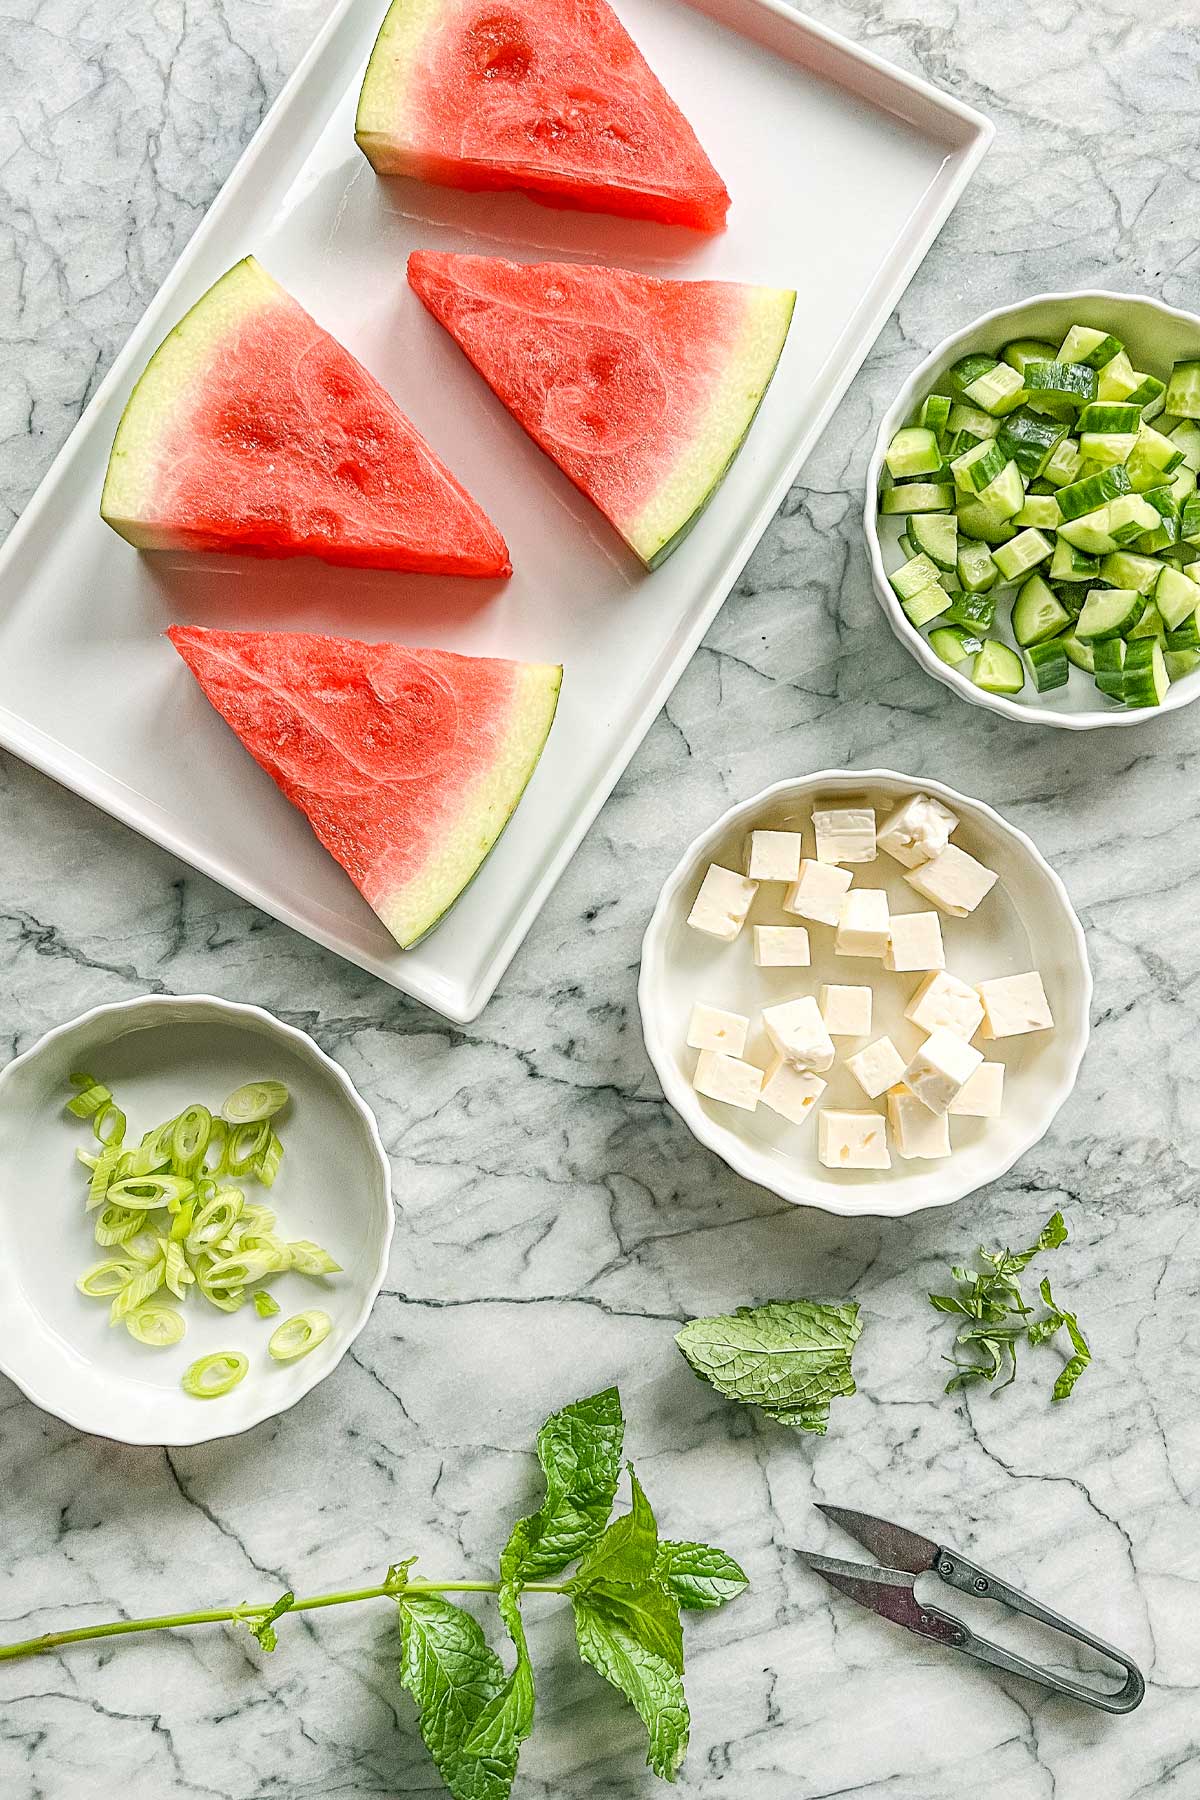 The ingredients for the Watermelon Cucumber Mint salad wedges in white ceramic containers on a marble counter. Watermelon slices, chopped cucumber, feta, sliced scallions, and fresh mint.